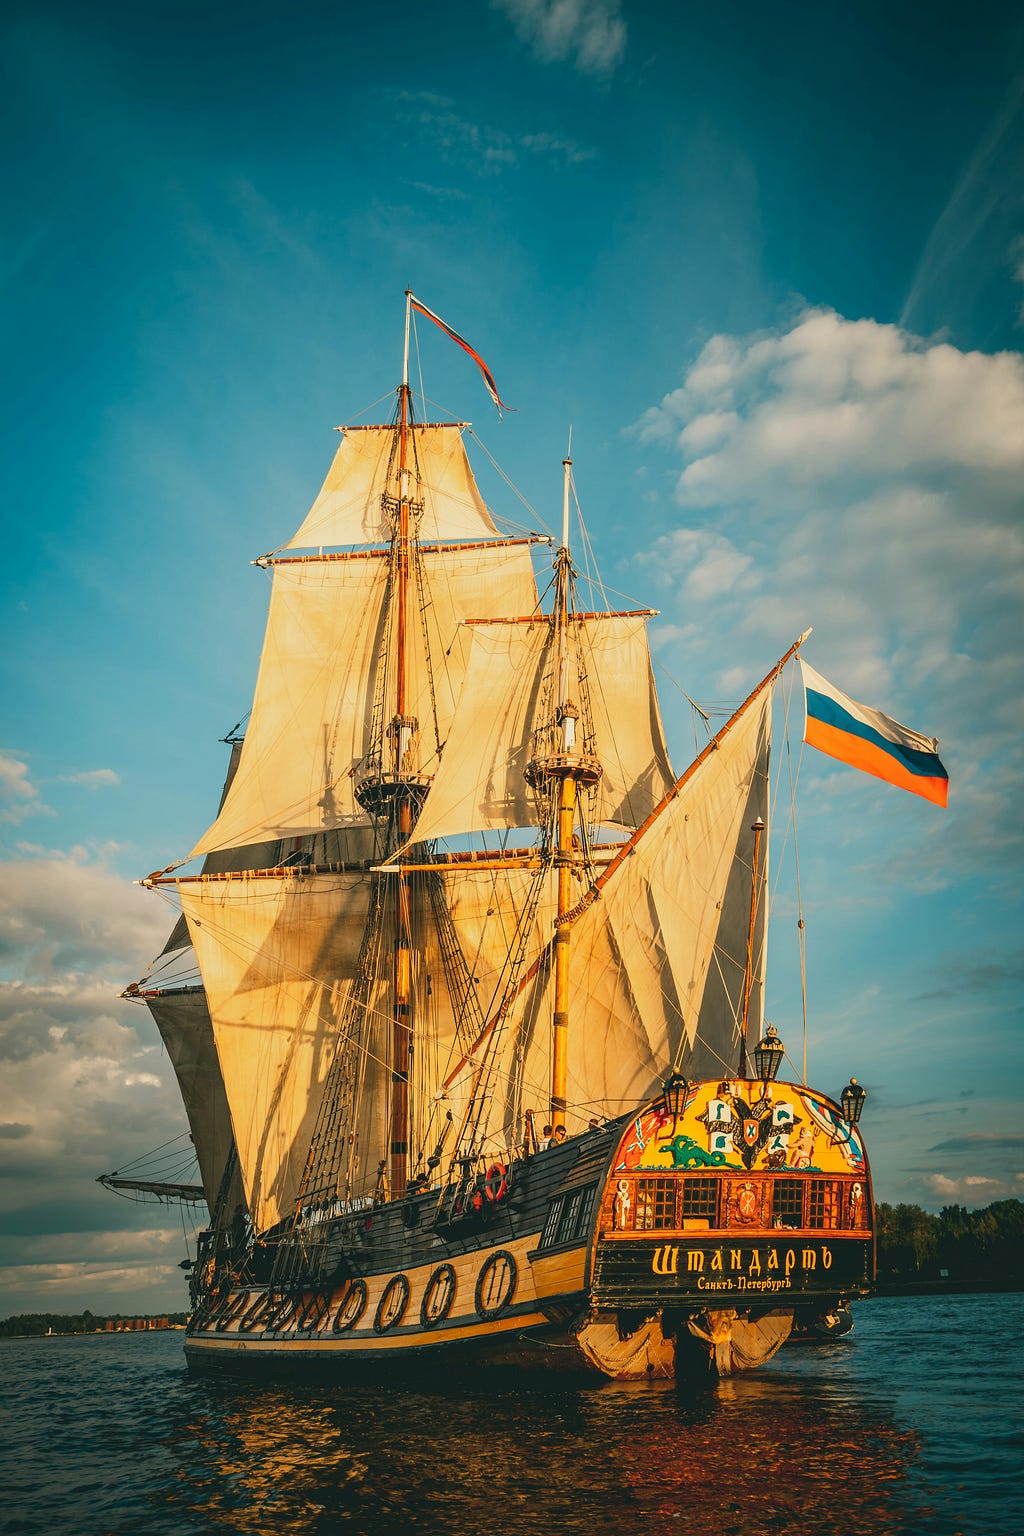 A classic tall ship or galleon with multiple sails, sailing at sunset with a flag featuring horizontal stripes